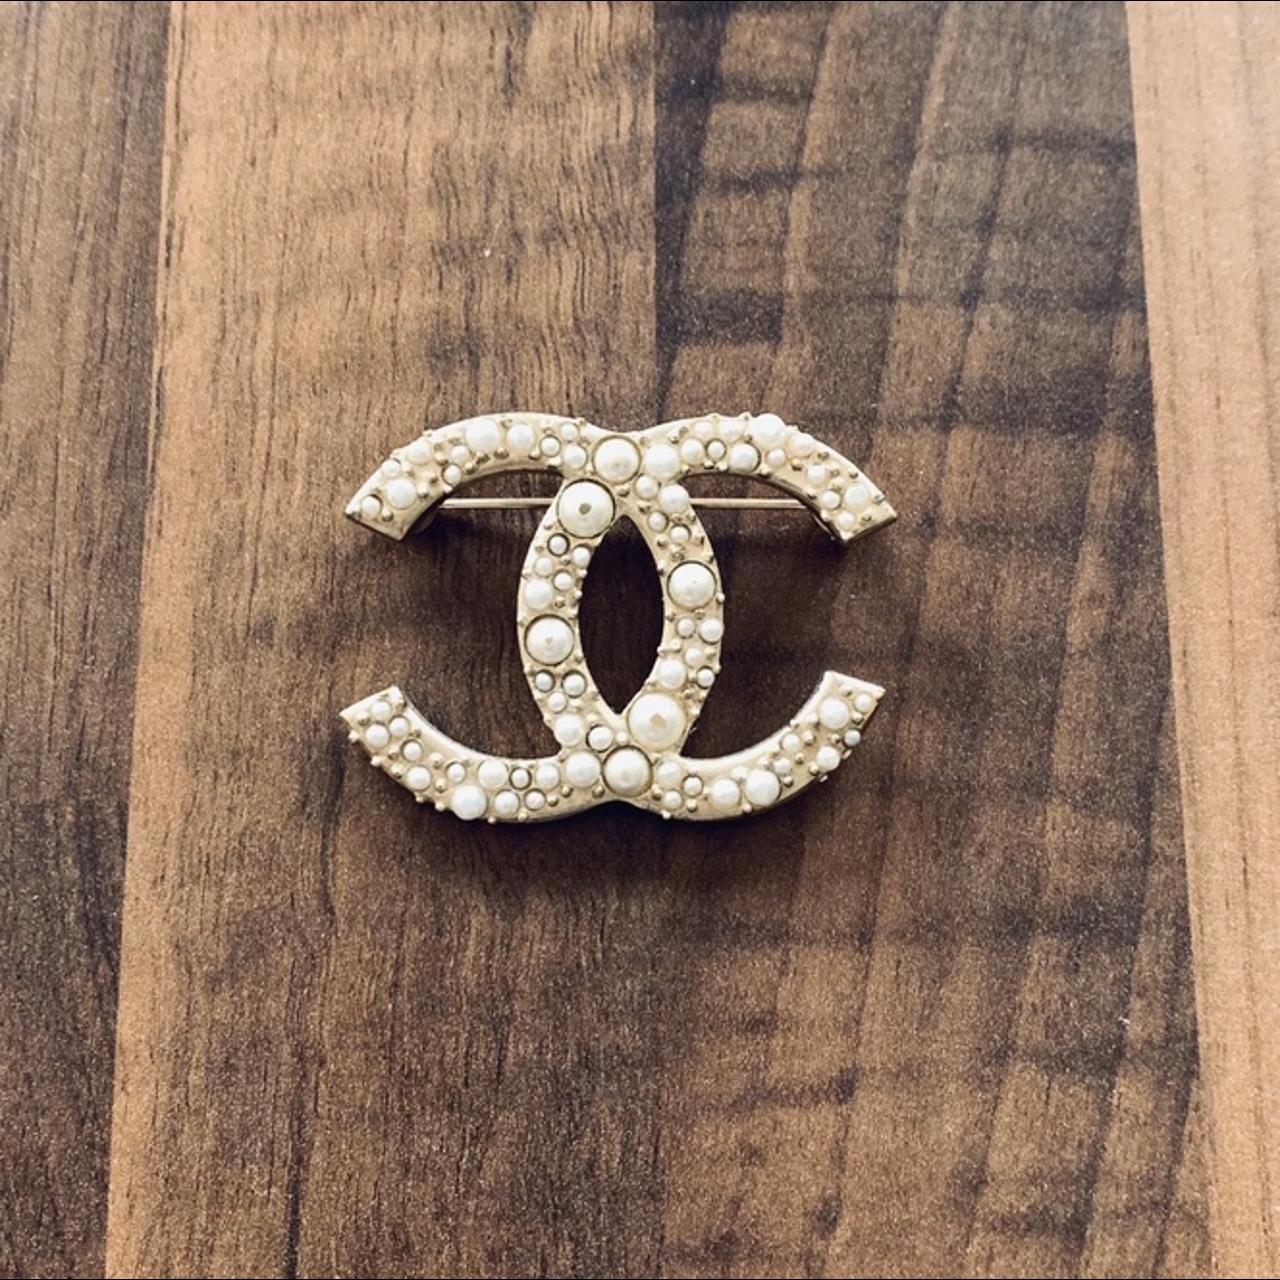 Chanel broach. Large pearls and crystals. Crystal - Depop